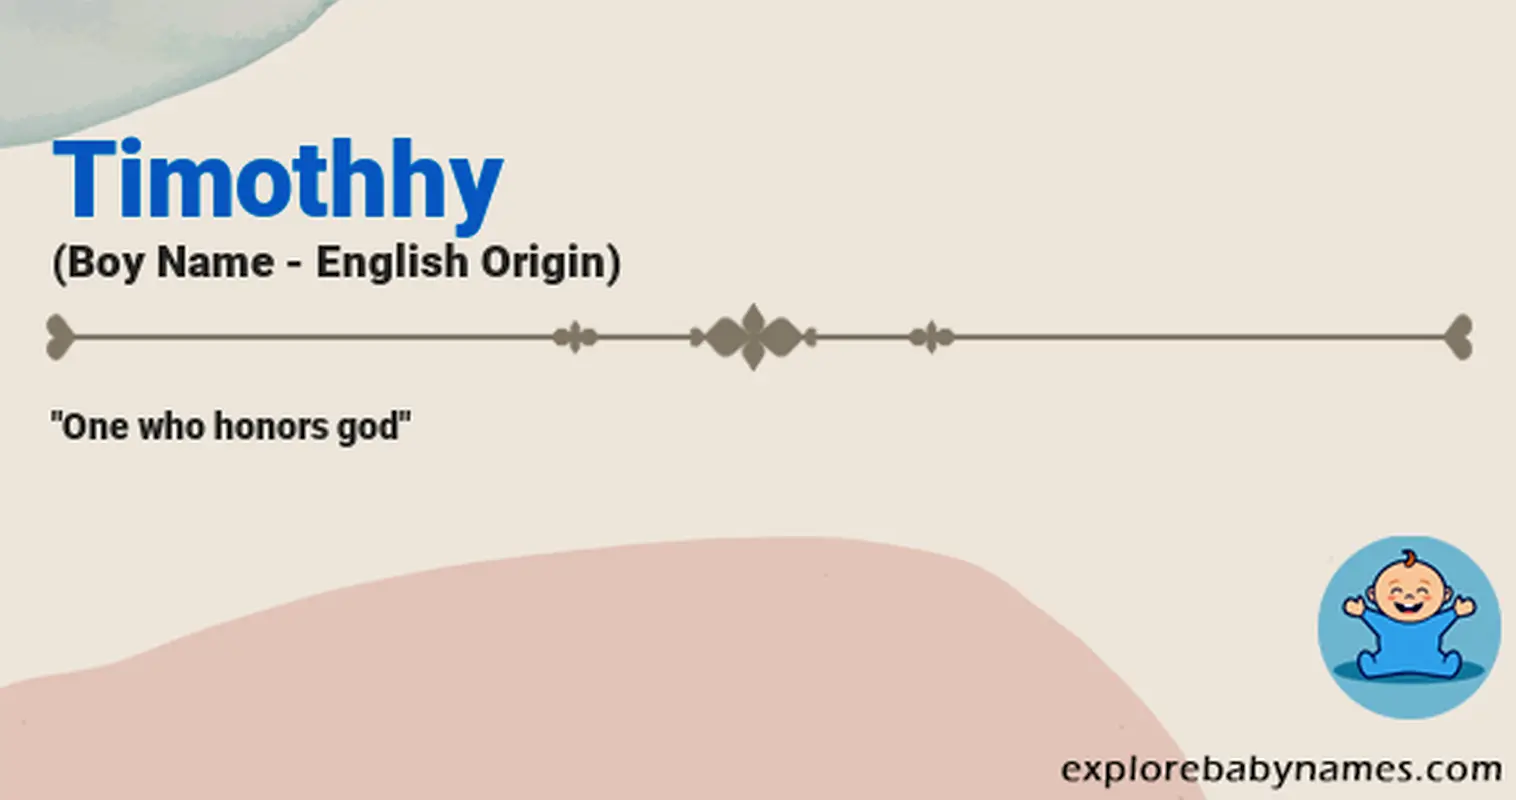 Meaning of Timothhy